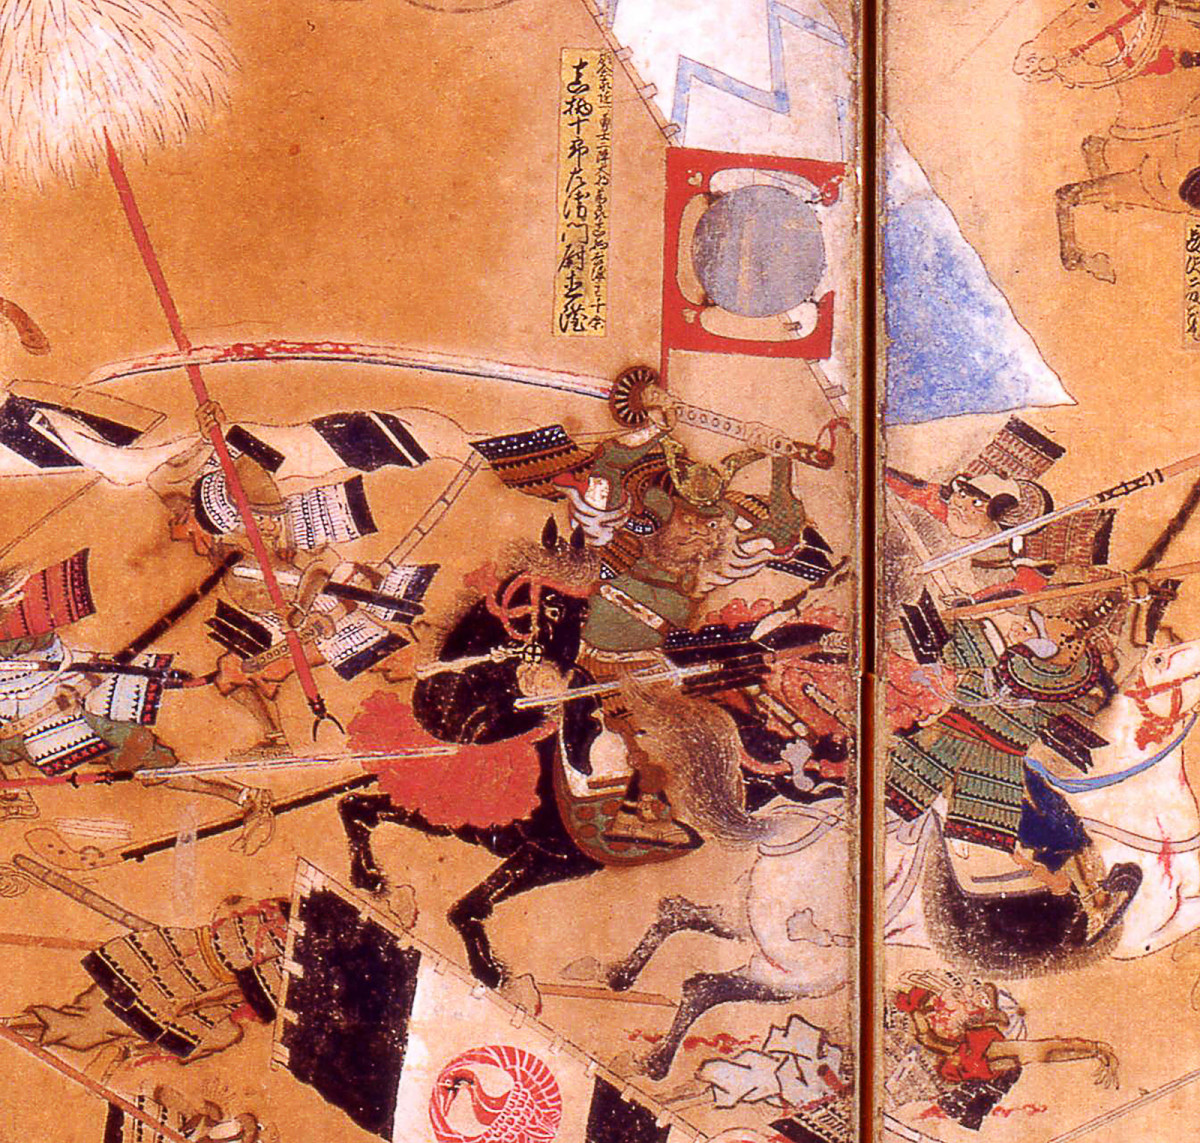 A painting depicting a samurai wielding an odachi on horseback at the Battle of Anegawa.